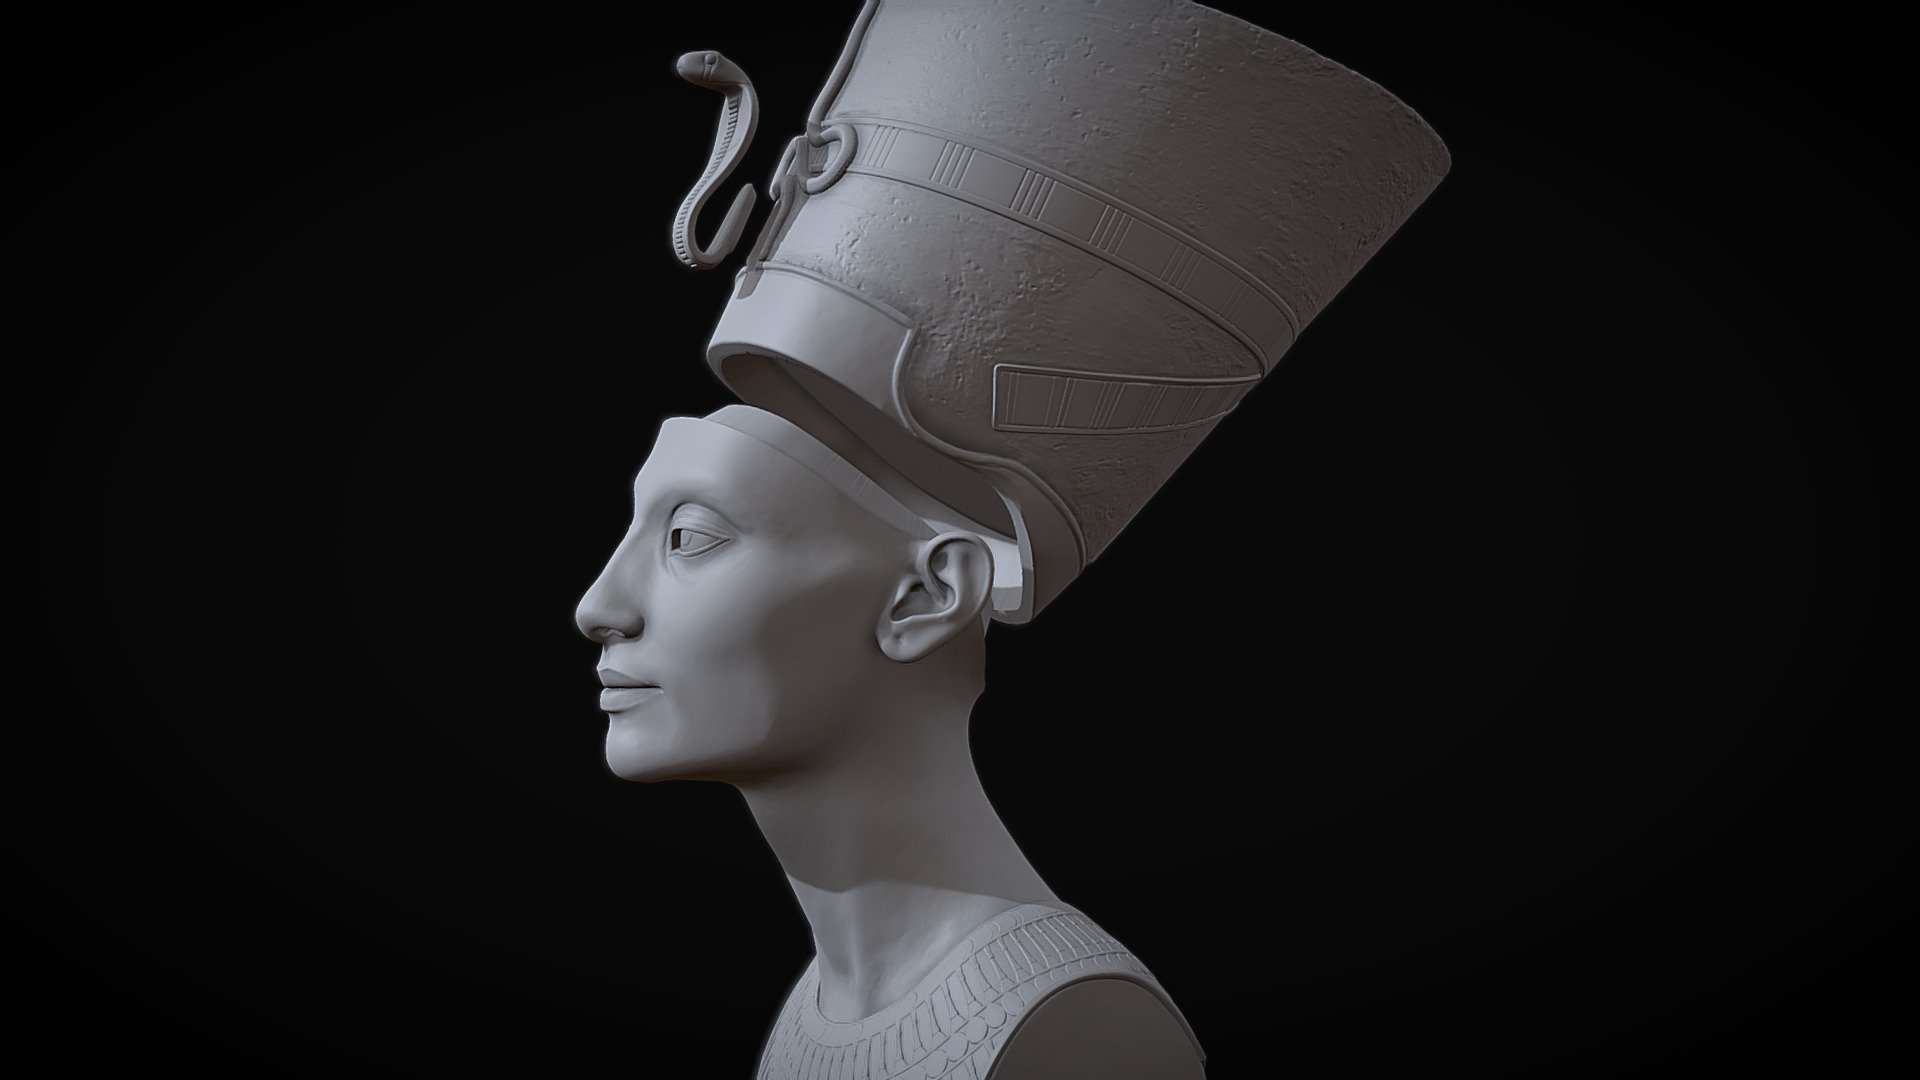 Neferneferuaten was a queen of the 18th Dynasty of Ancient Egypt, the great royal wife of Pharaoh Akhenaten Highpoly FBX.

https://youtube.com/shorts/pzSwf-95AQY?feature=share

Let me know if you have any requests.

Enjoy!

PS: Model used as base “Nefertiti’s bust (like in the museum)” (https://skfb.ly/Mn7L) by C. Yamahata is licensed under Creative Commons Attribution (http://creativecommons.org/licenses/by/4.0/) 3d model